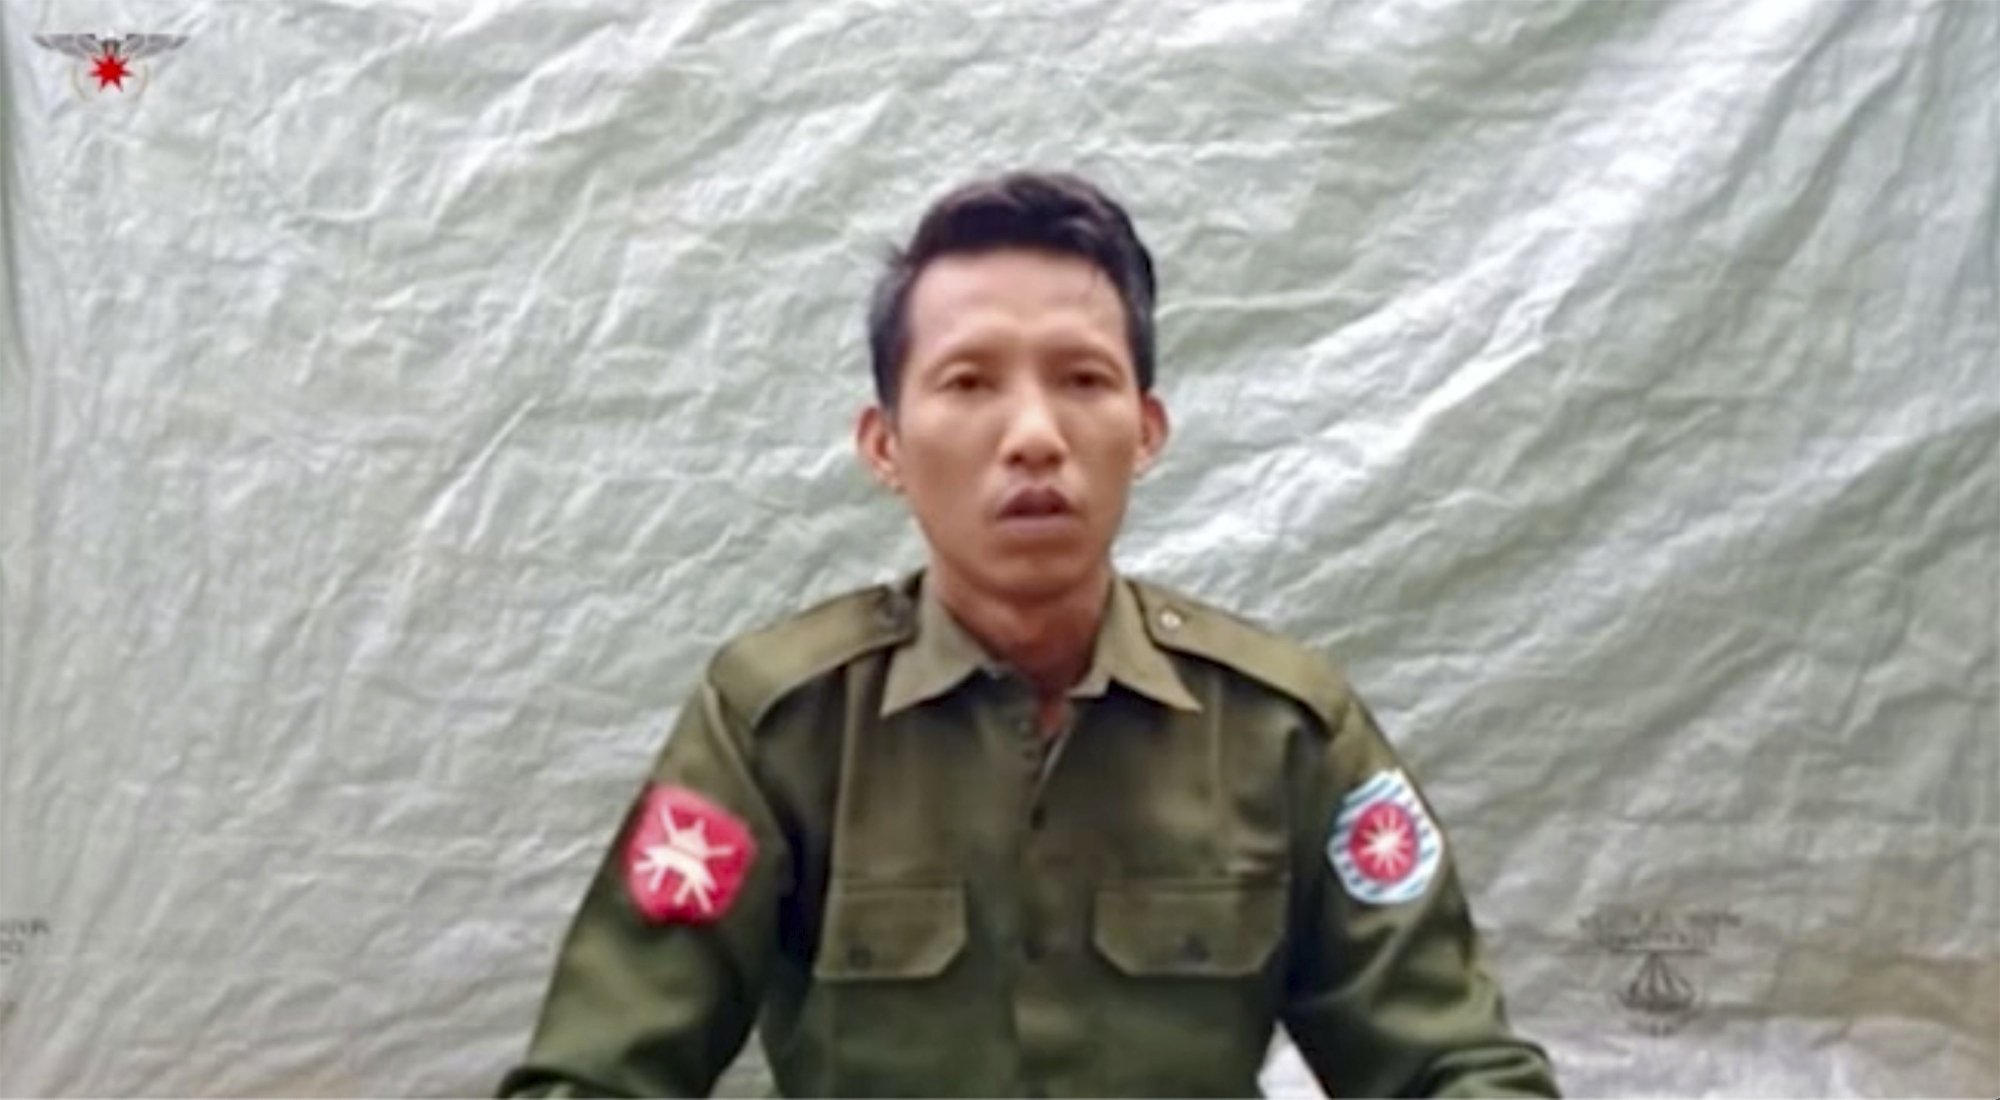 Private Myo Win Tun provides a video testimony from an undisclosed location somewhere in Myanmar on July 23, 2020. (Arakan Army Photo via AP)